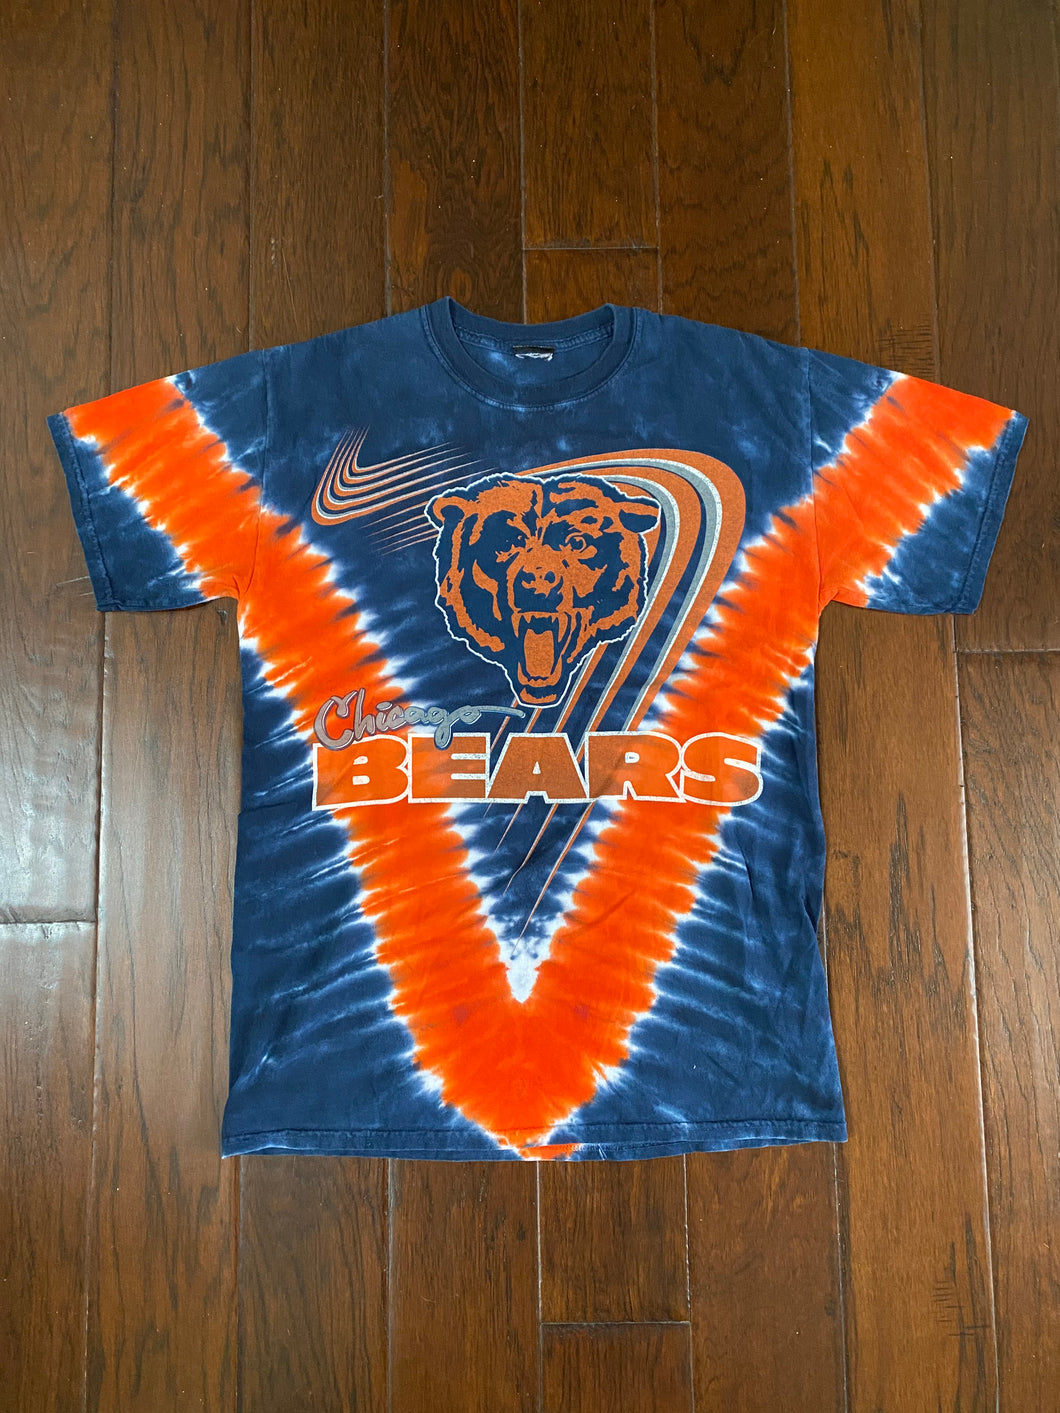 Chicago Bears 1990’s Tie-Dye Vintage Distressed T-shirt